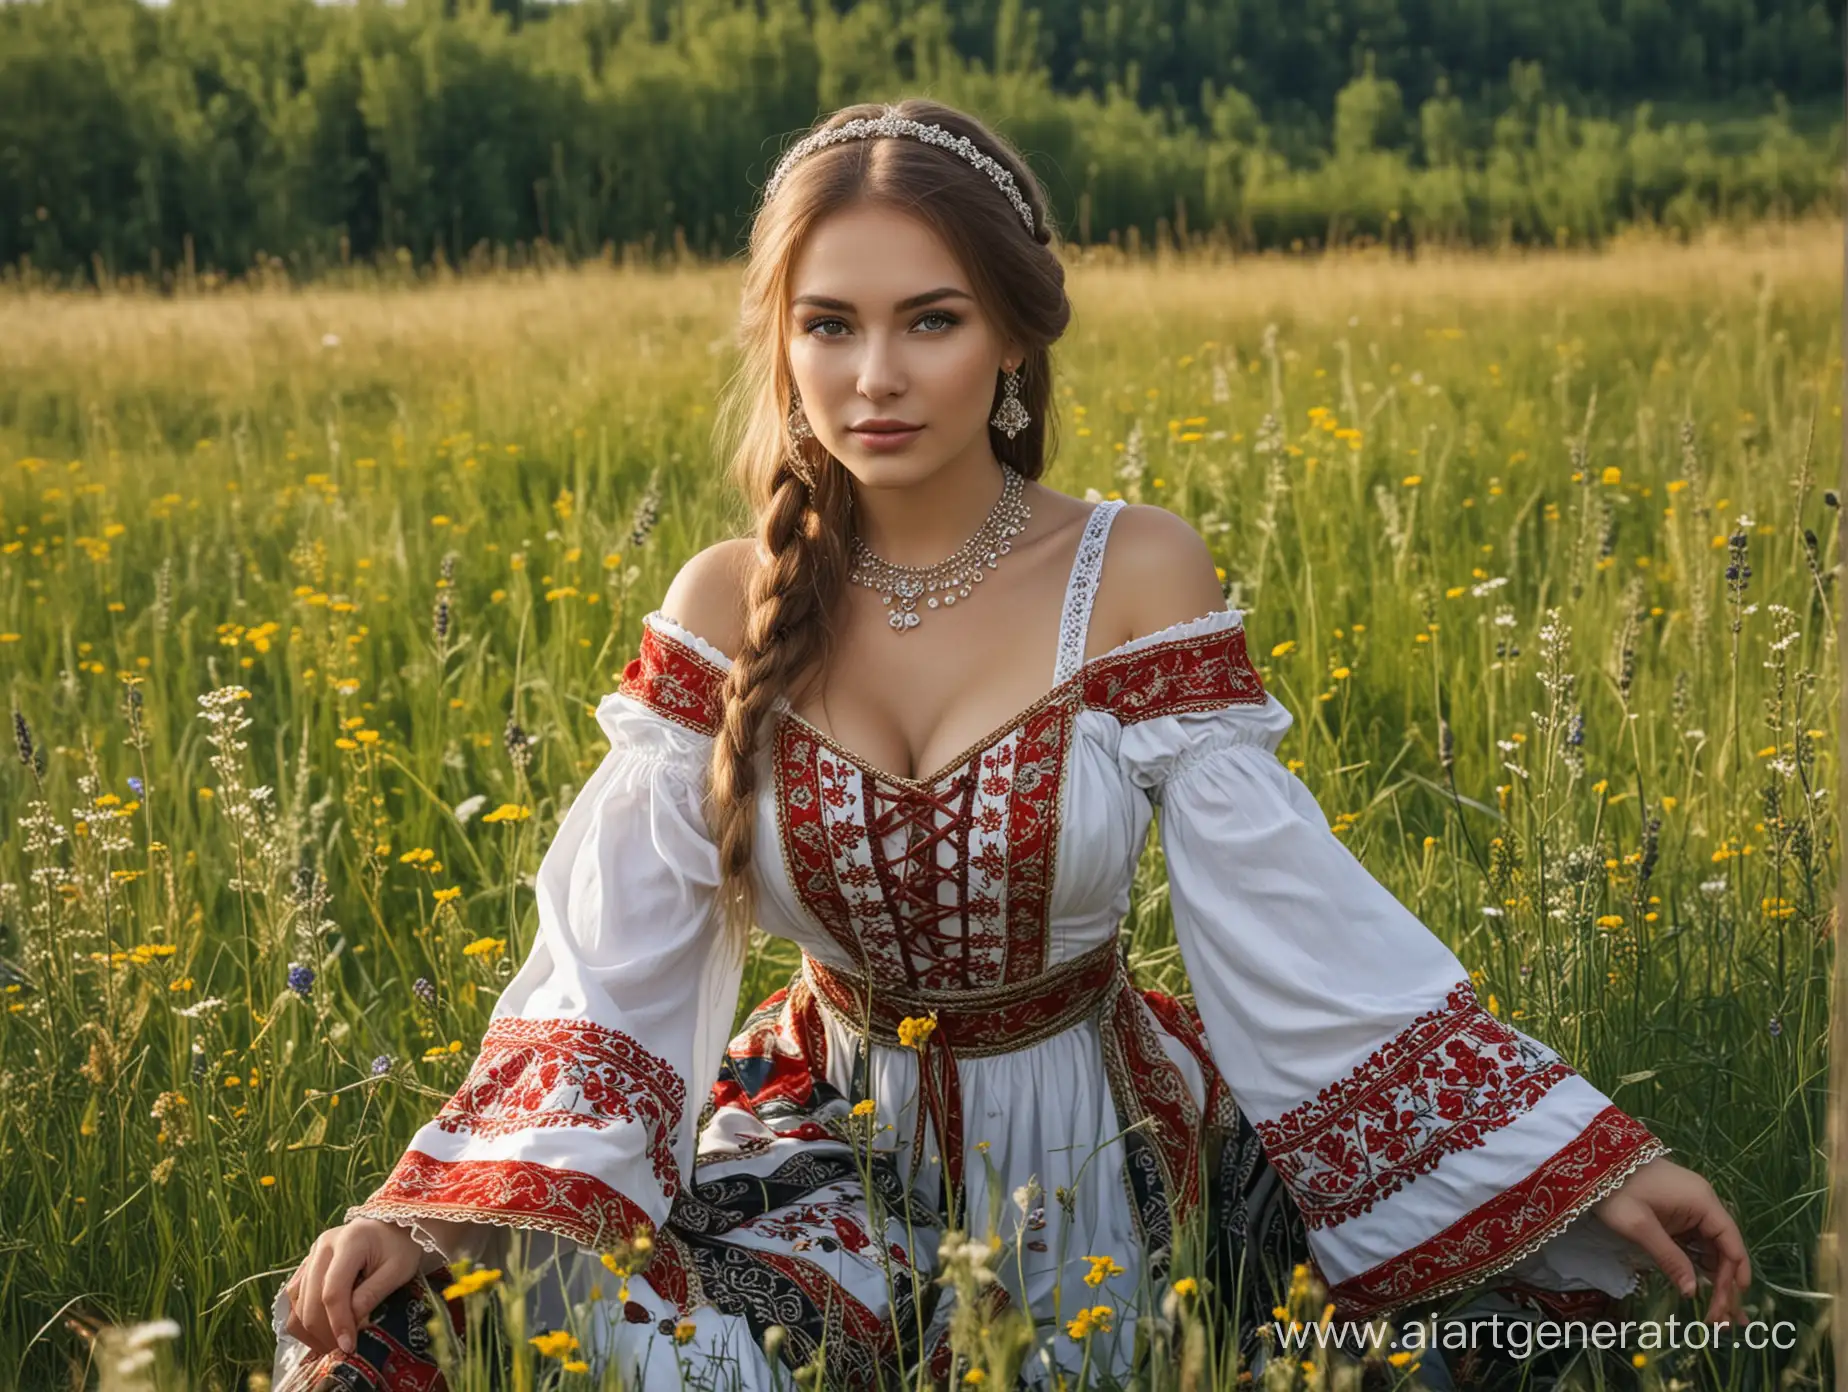 Russian-Sexy-Girl-Posing-in-Traditional-Costume-Amid-Meadow